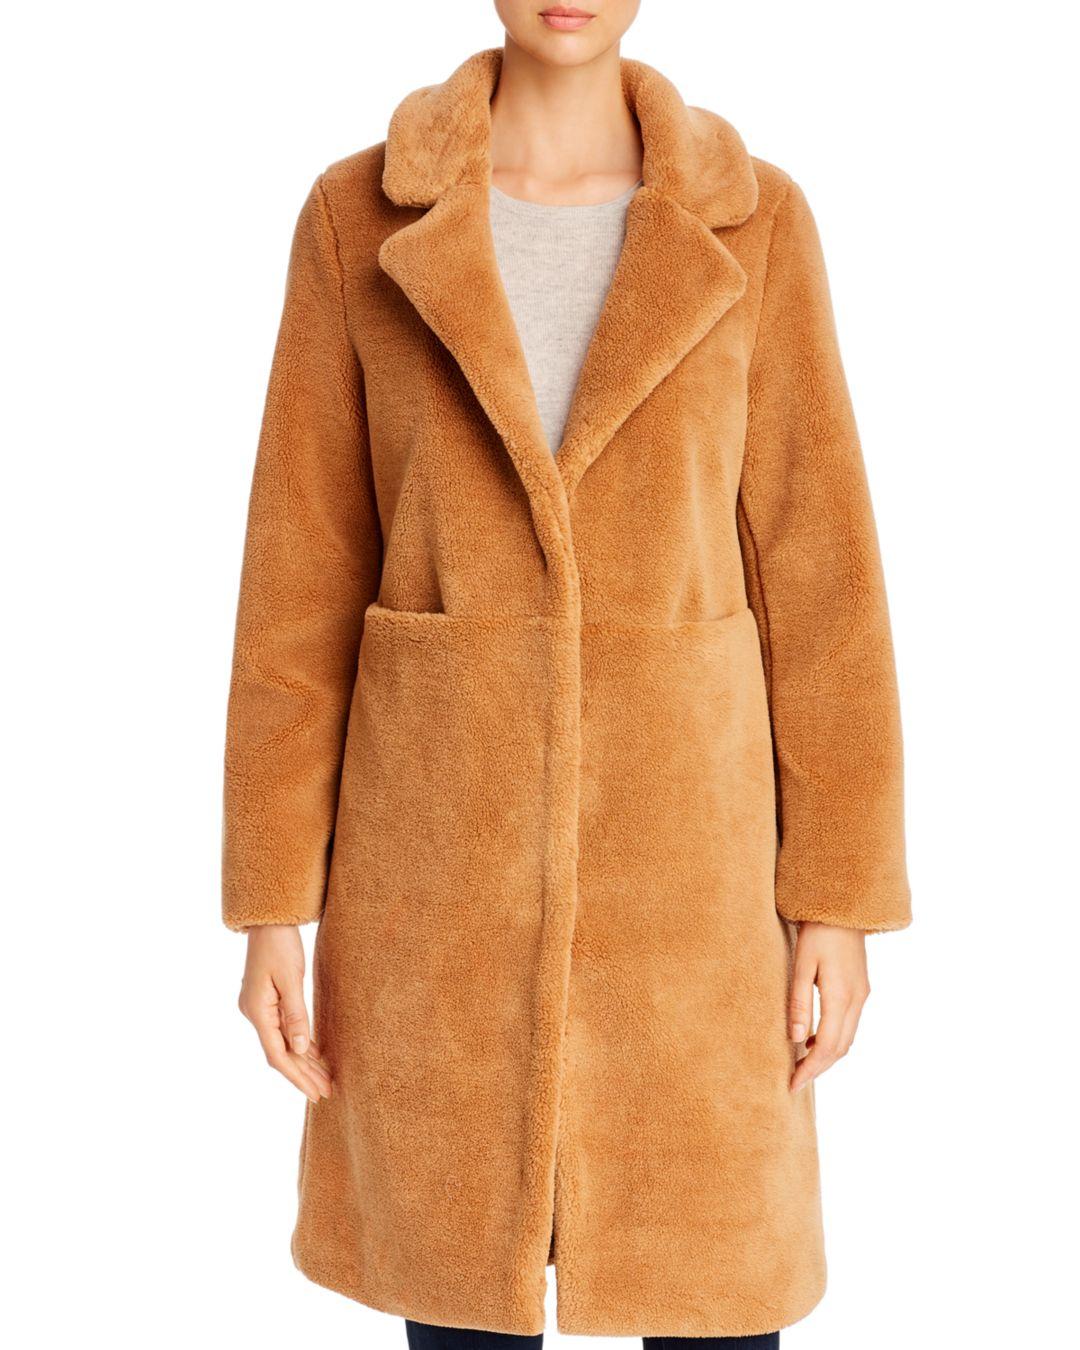 Moda Synthetic Holly Long Teddy Coat in Tobacco Brown (Brown) - Lyst